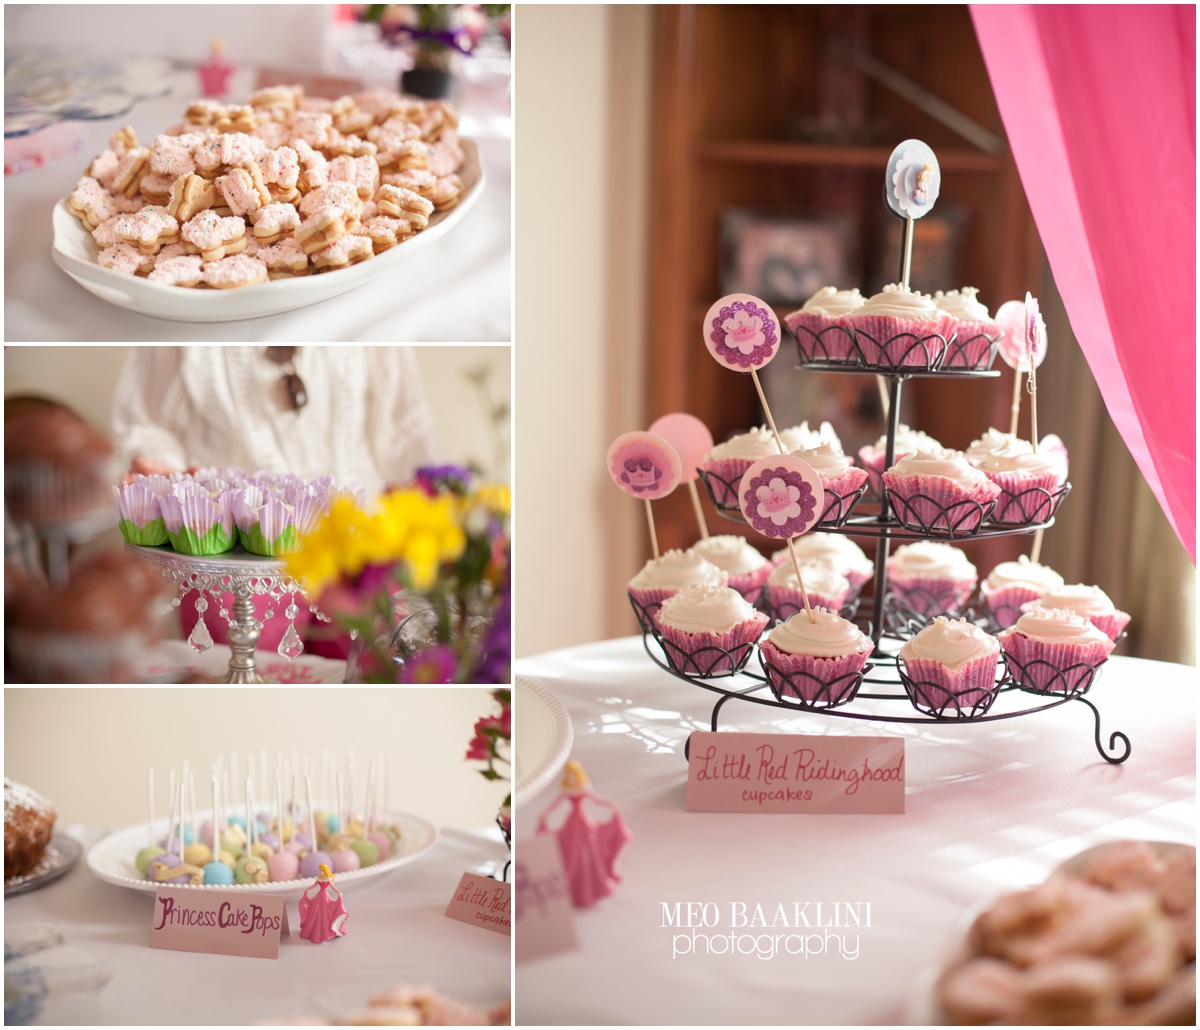 Baby-Shower-Inspiration-Once-Upon-A-Time-Disney_0023